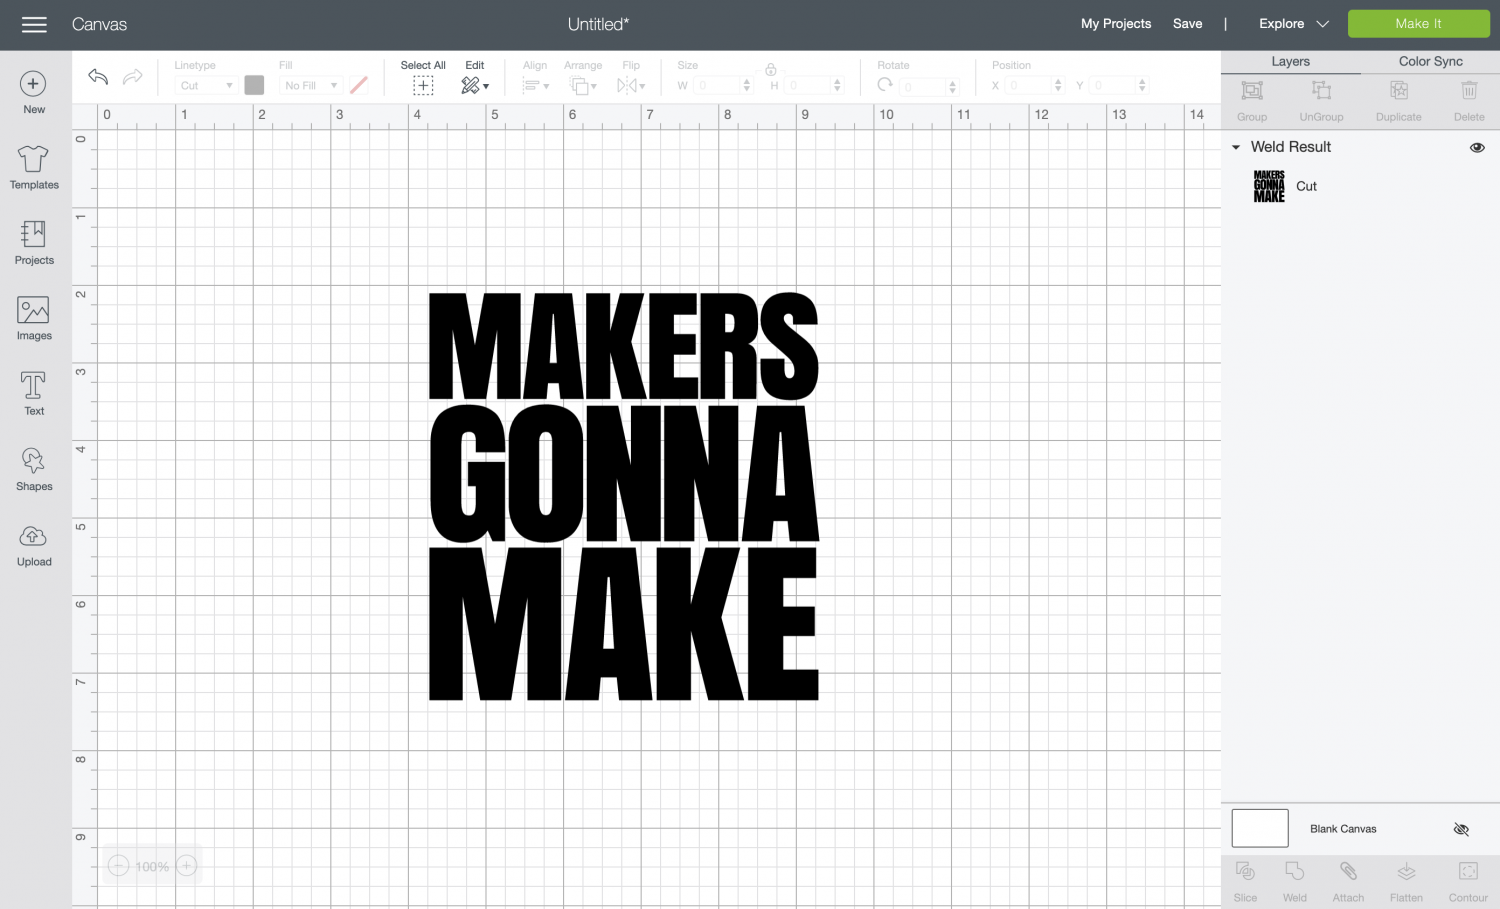 "Makers Gonna Make" text in Cricut Design Space, welded together.